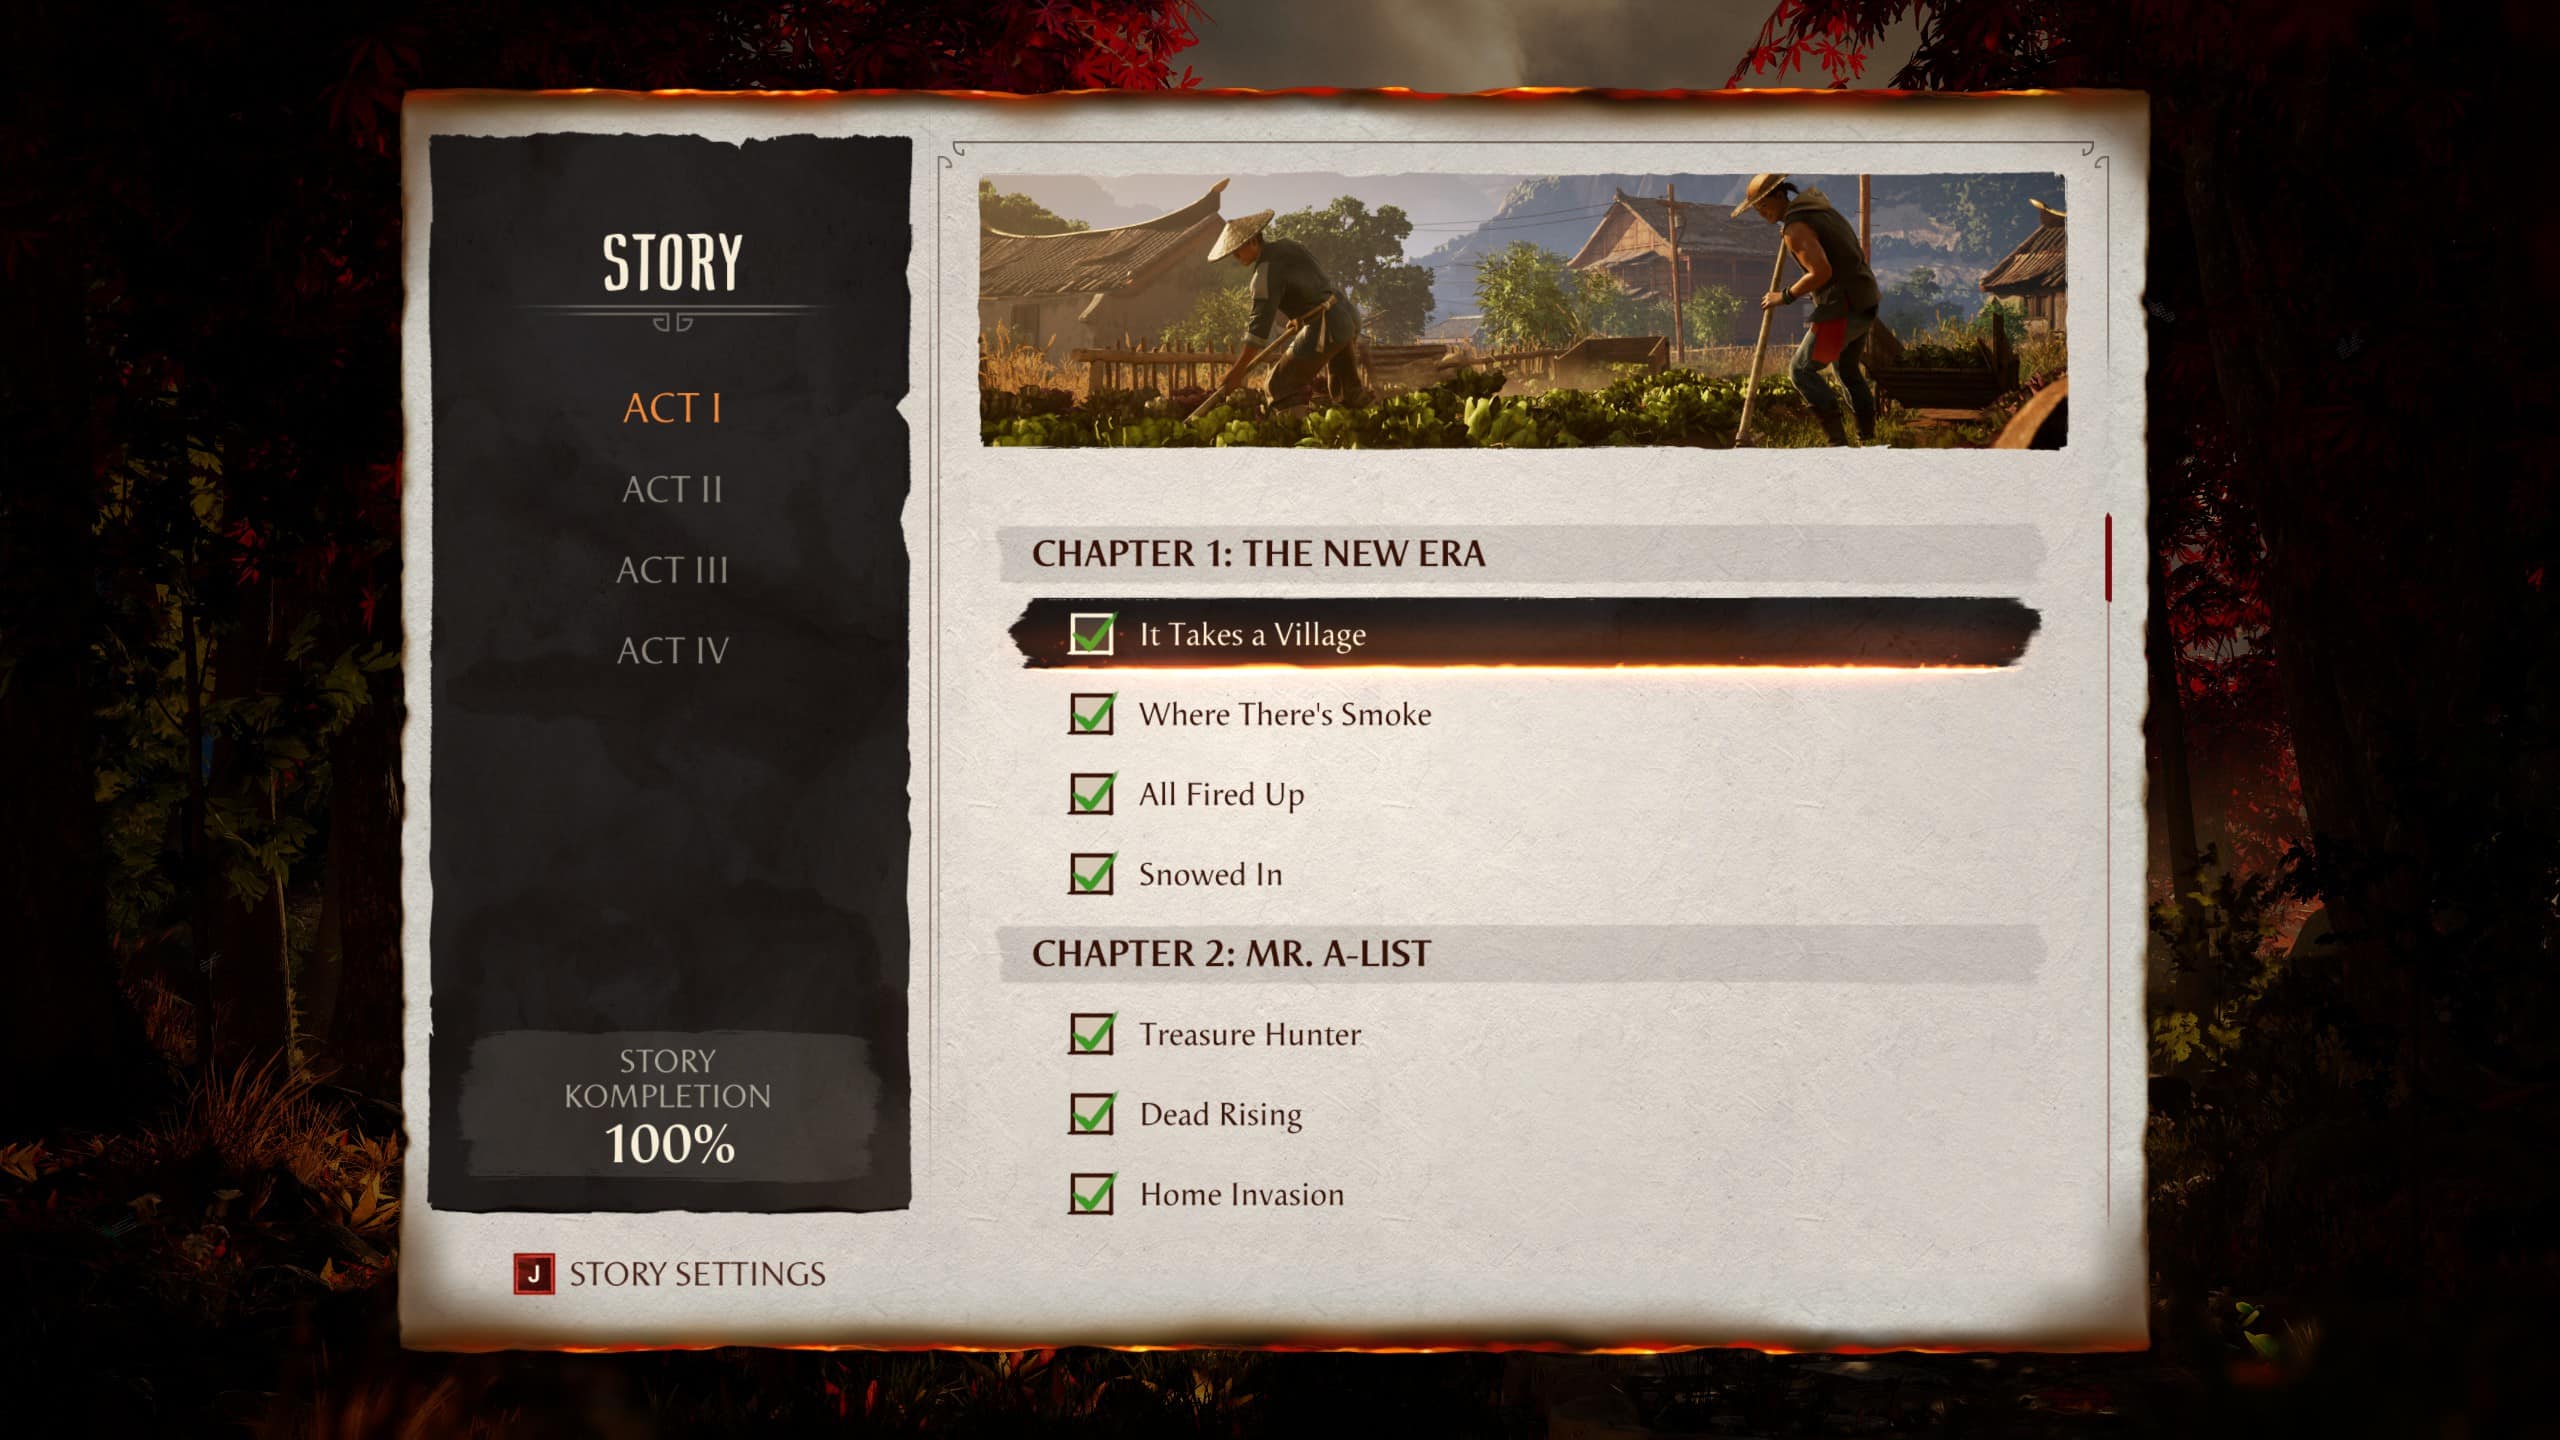 Mortal Kombat 1 chapters: An image of the in-game campaign menu with the first act highlighted.